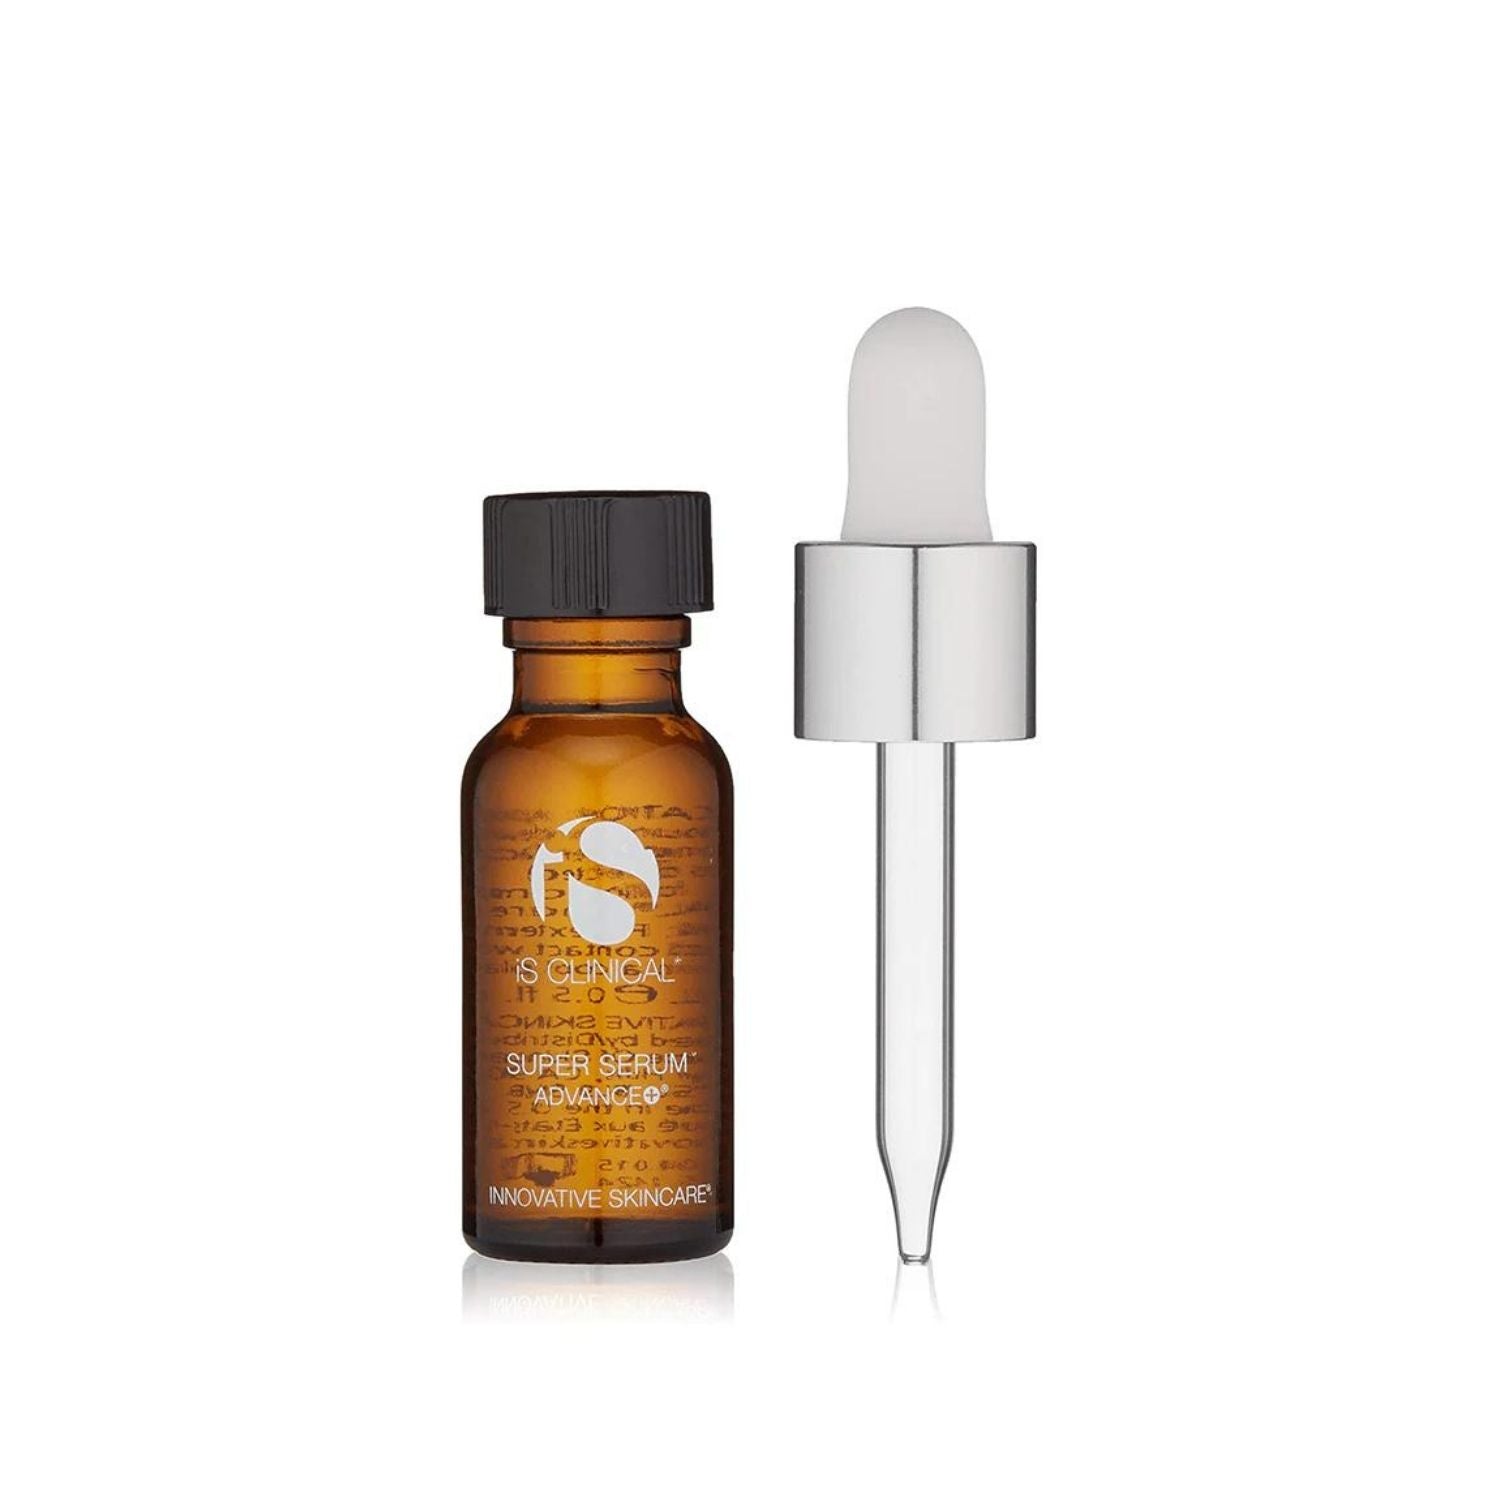 iS Clinical Super Serum Advance+ 15ml - Dr. Pen Store - iS Clinical Buy Genuine Dr Pen Products with Trust